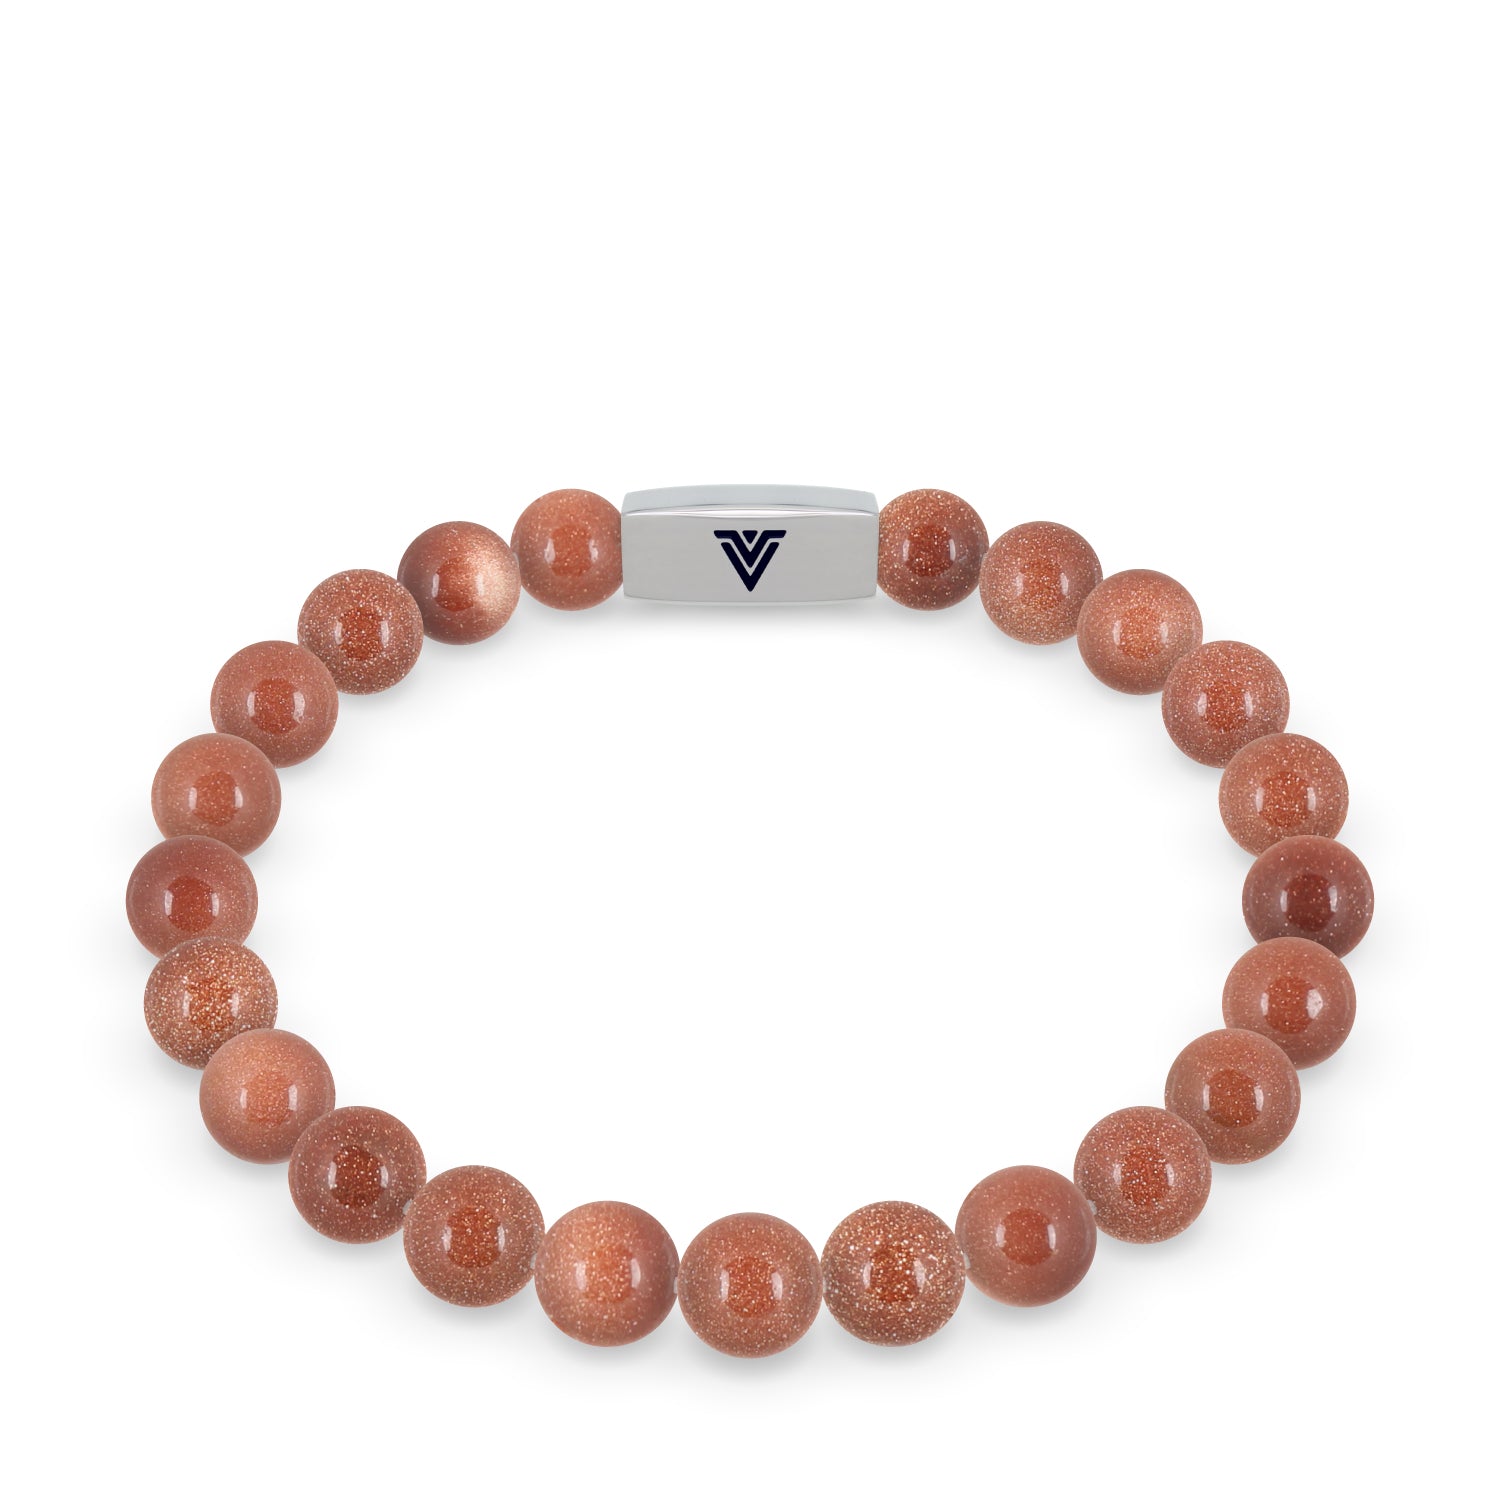 Front view of an 8mm Red Goldstone beaded stretch bracelet with silver stainless steel logo bead made by Voltlin